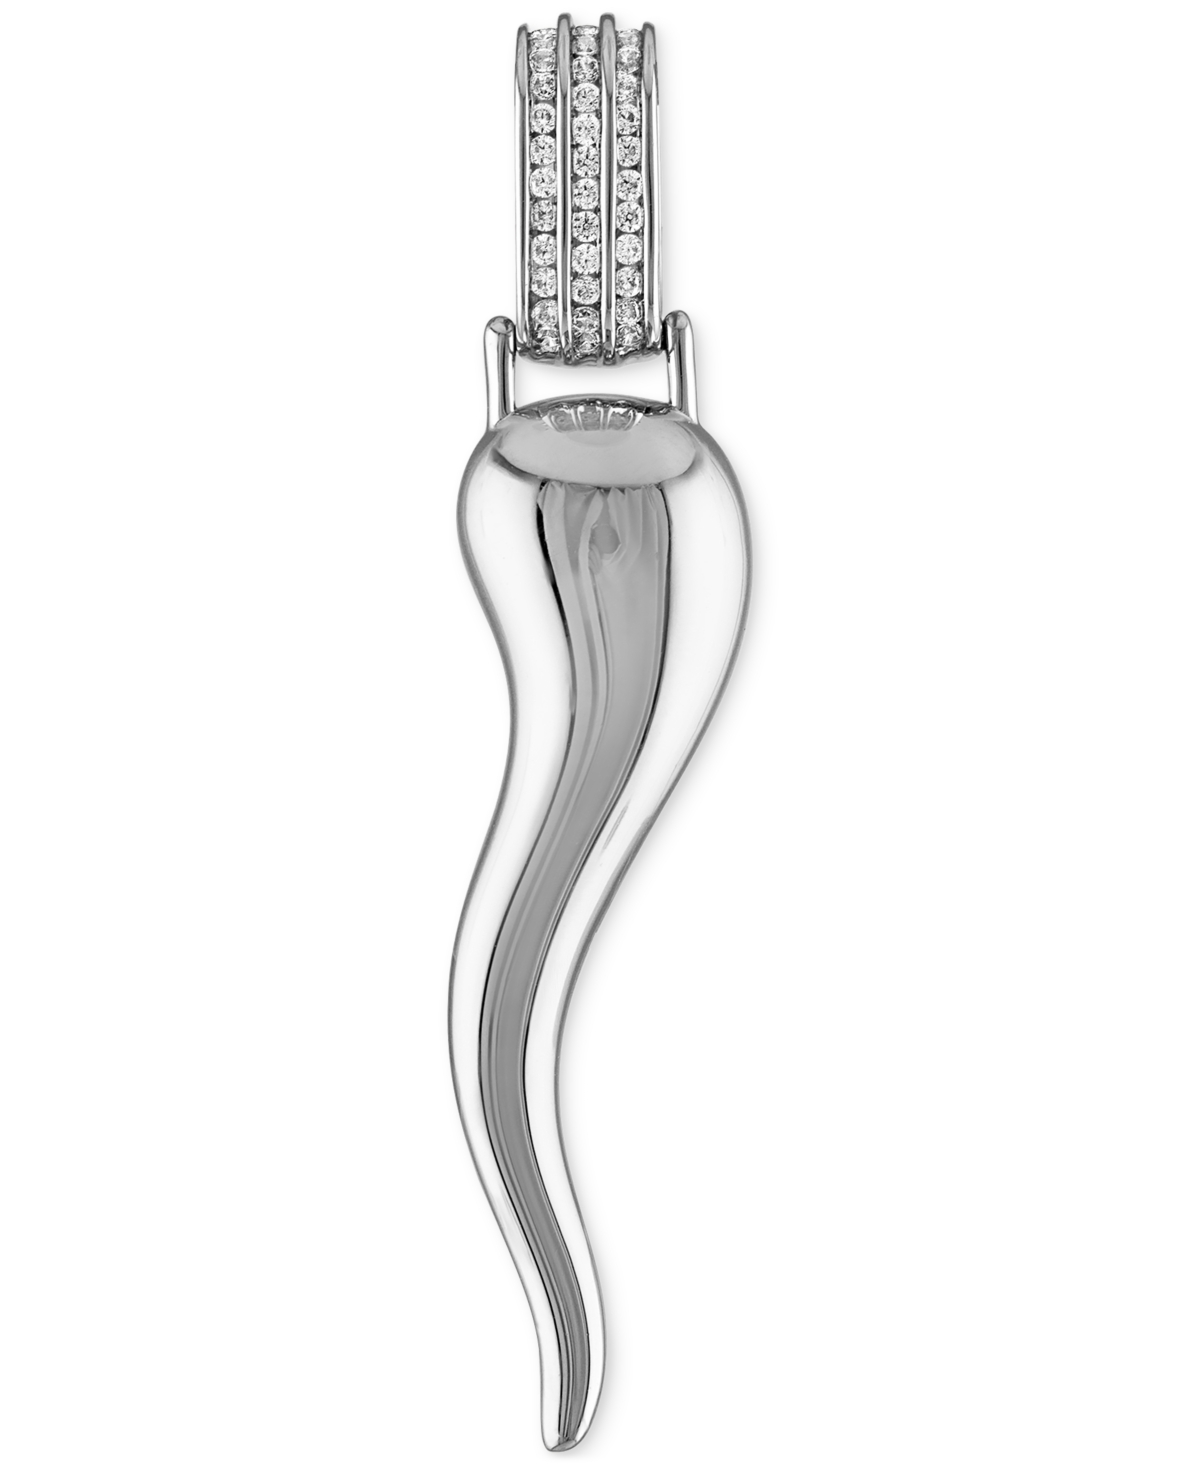 Esquire Men's Jewelry Cubic Zirconia Horn Pendant In Sterling Silver, Created For Macy's